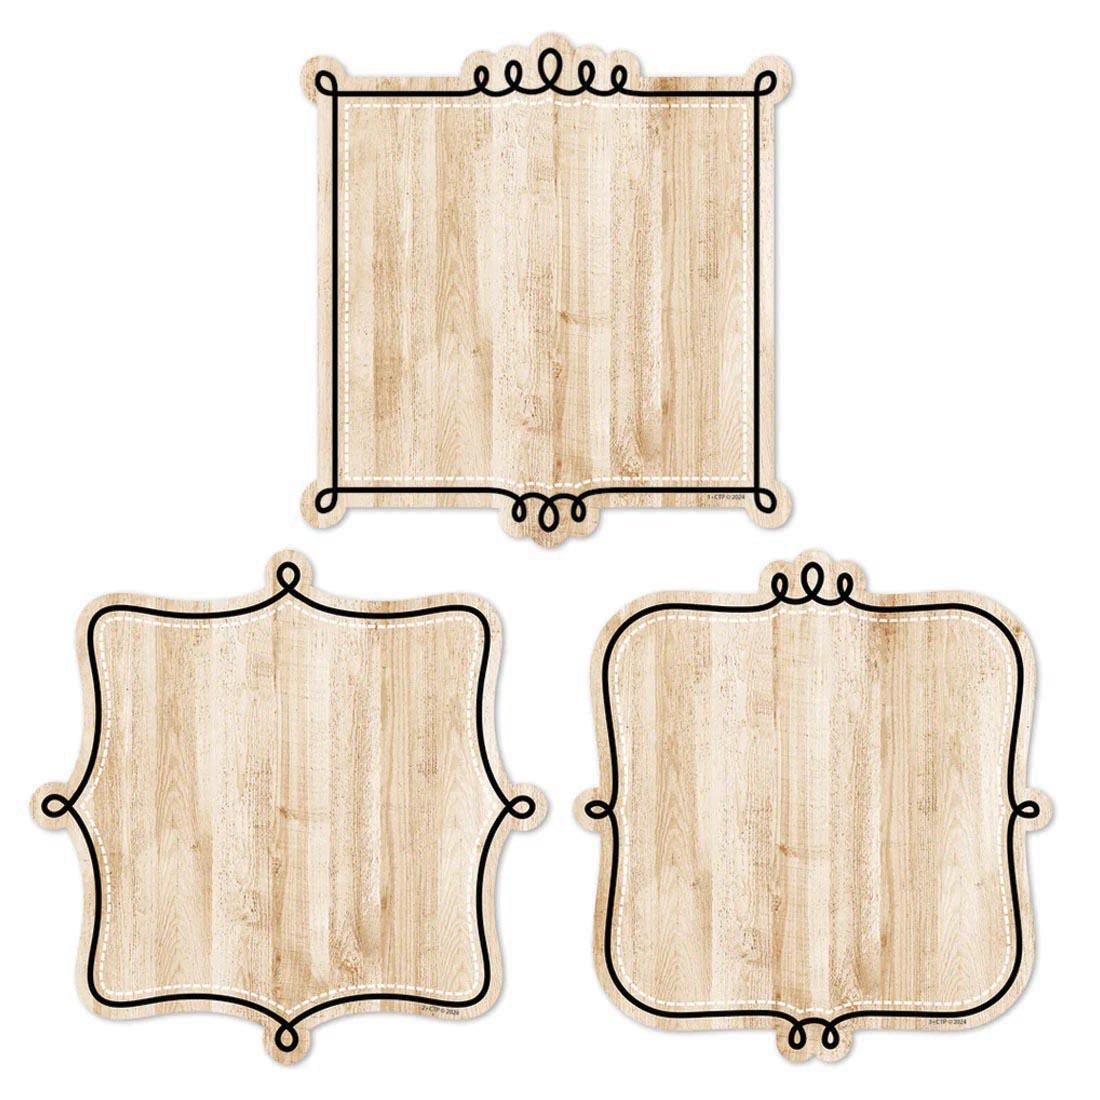 Three Loop-de-Loop on Wood Designer Cut-Outs from the Core Decor collection by Creative Teaching Press